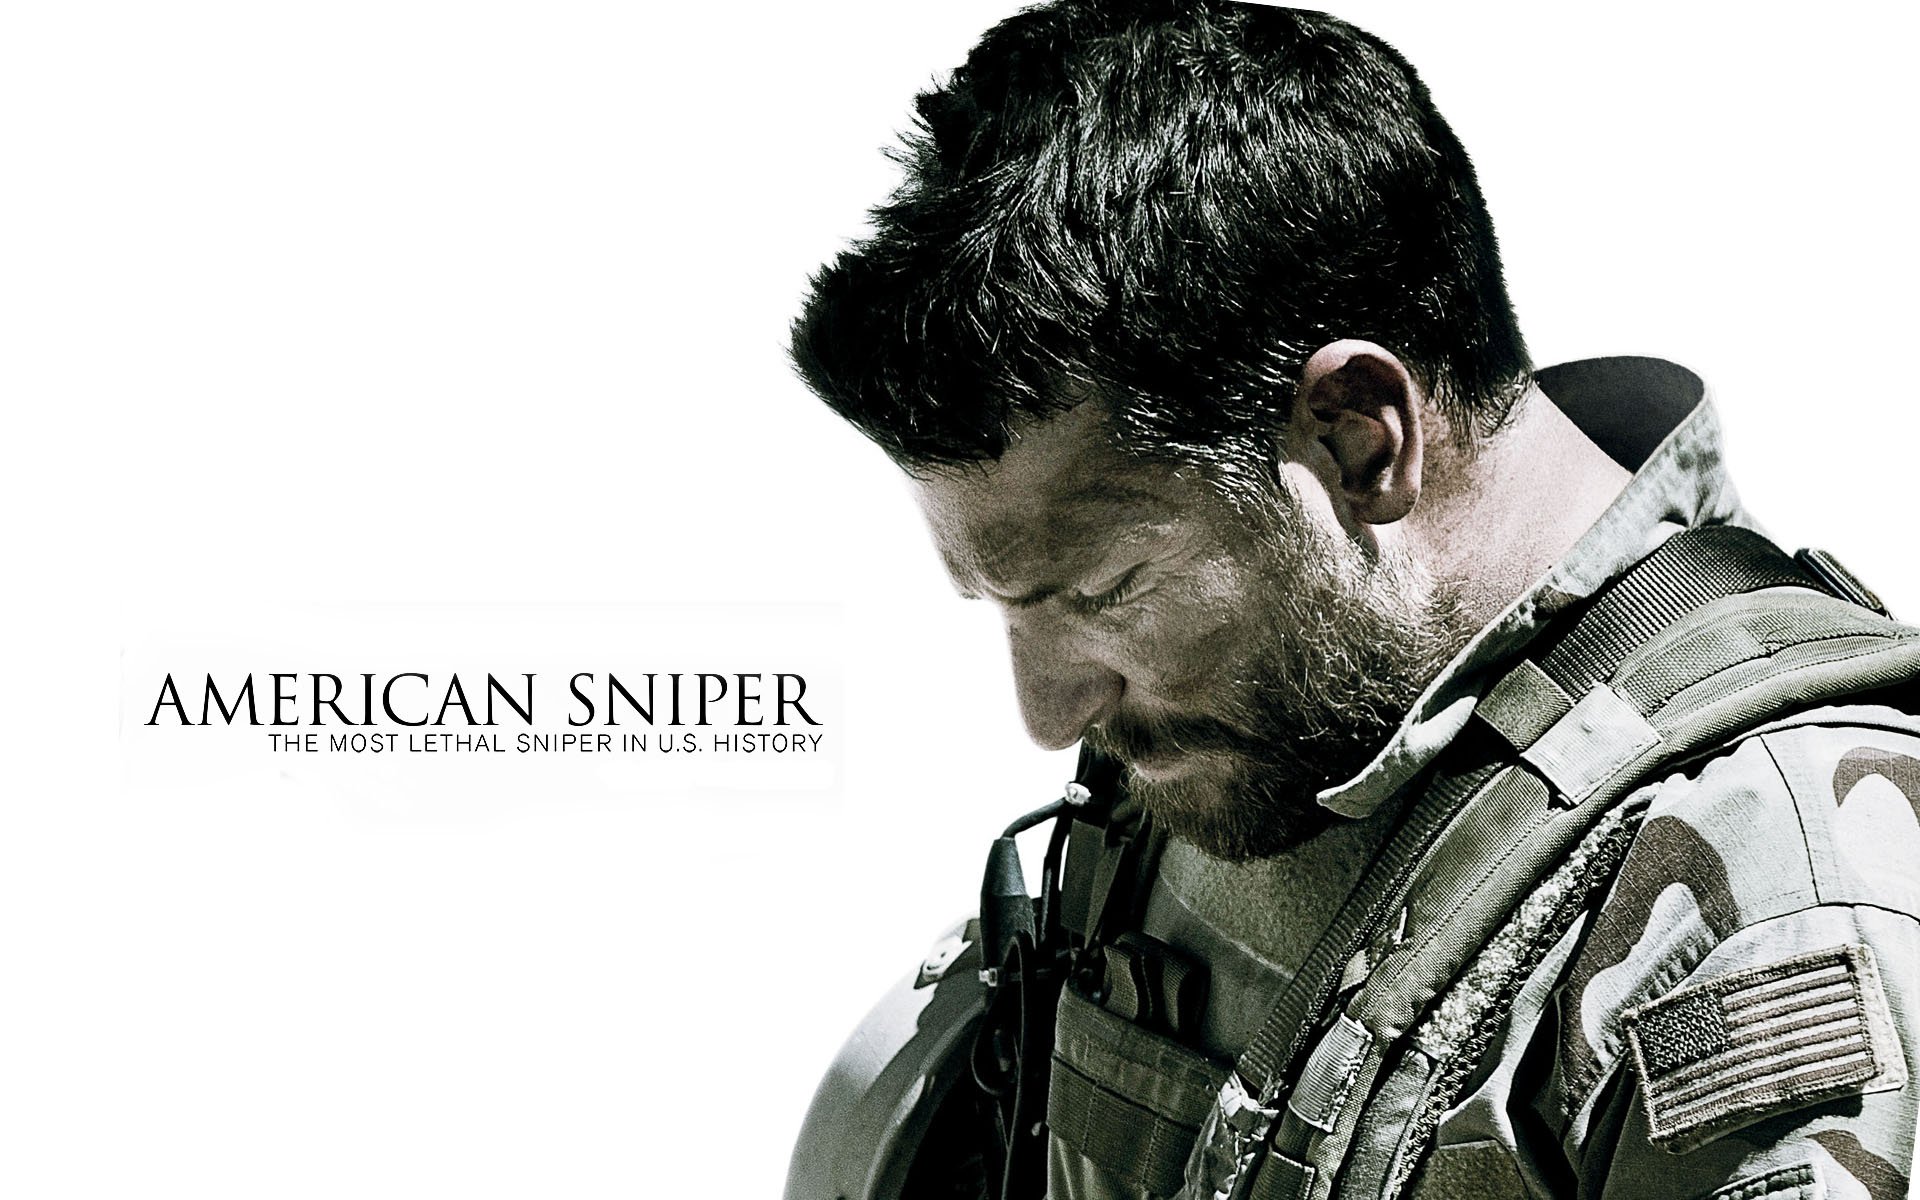 american, Sniper, Biography, Action, Military, Warrior, Soldier, 1americansniper, Clint, Eastwood, War, Fighting Wallpaper